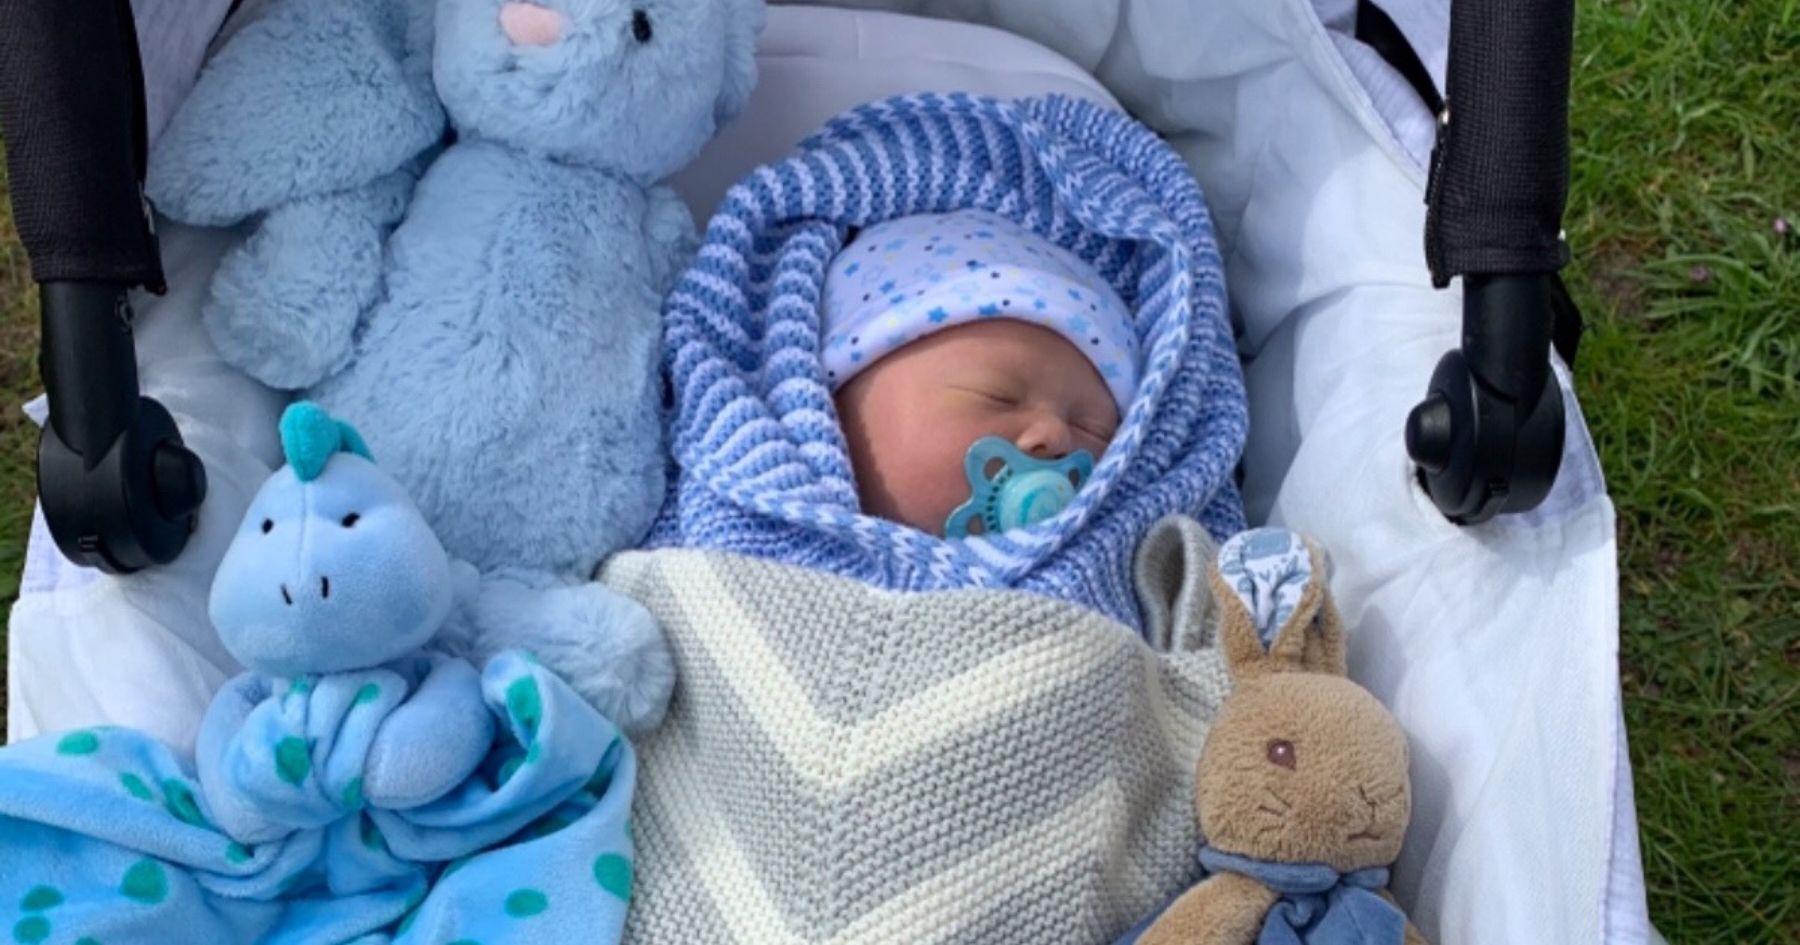 Parents have 'two wonderful weeks' with baby boy after he was born with inoperable heart condition